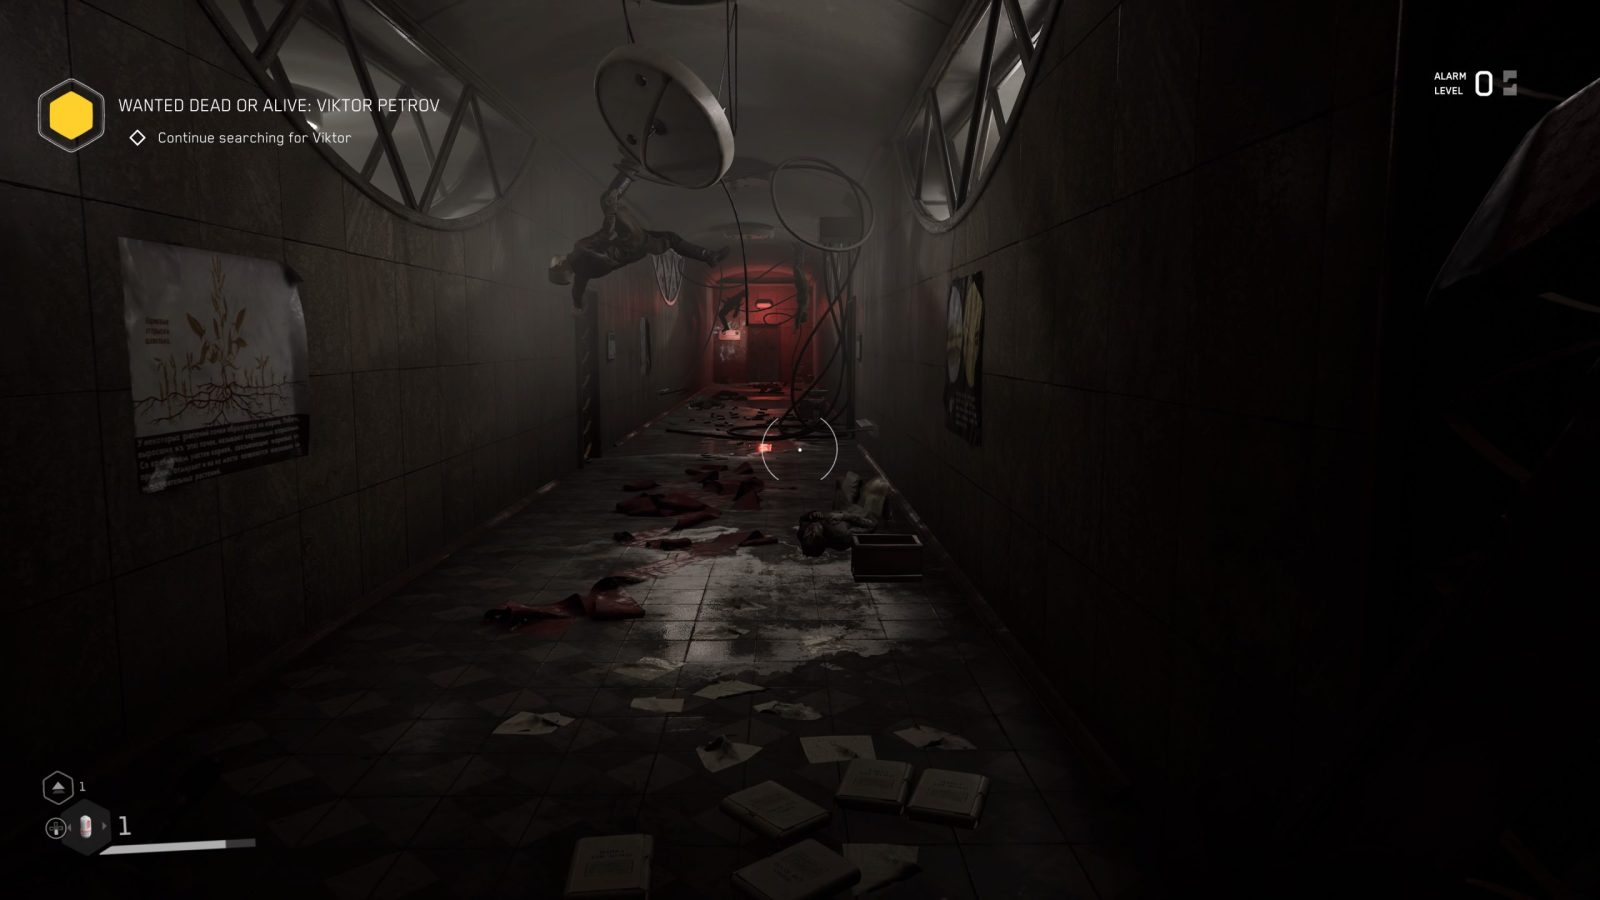 Atomic Heart PC Review